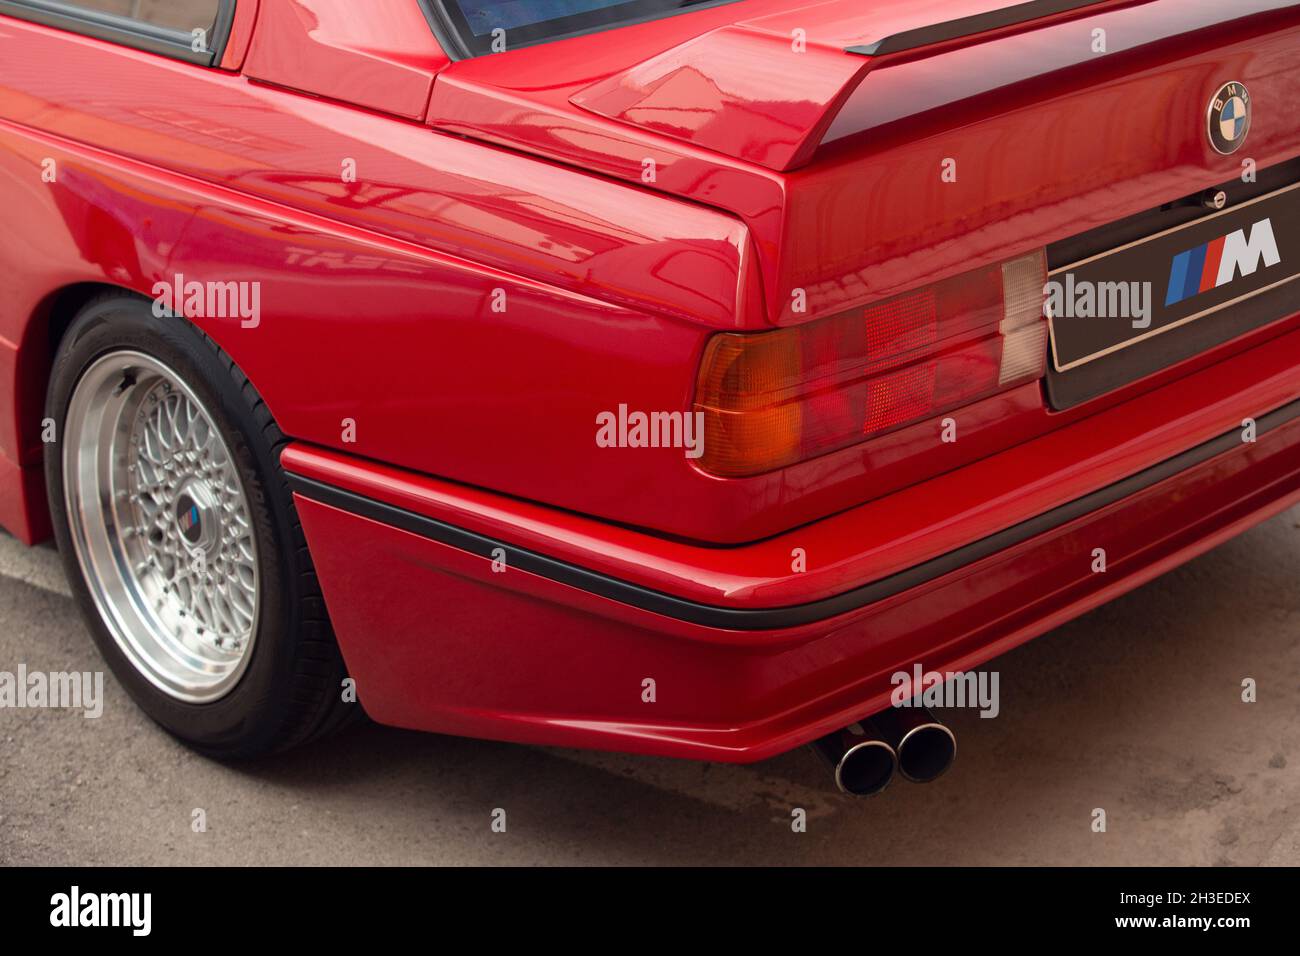 Cartes, Spain - October 16, 2021: Clasic car show. The first BMW M3 was based on the E30 3 Series ,and It was presented to the public at the 1985 Fran Stock Photo